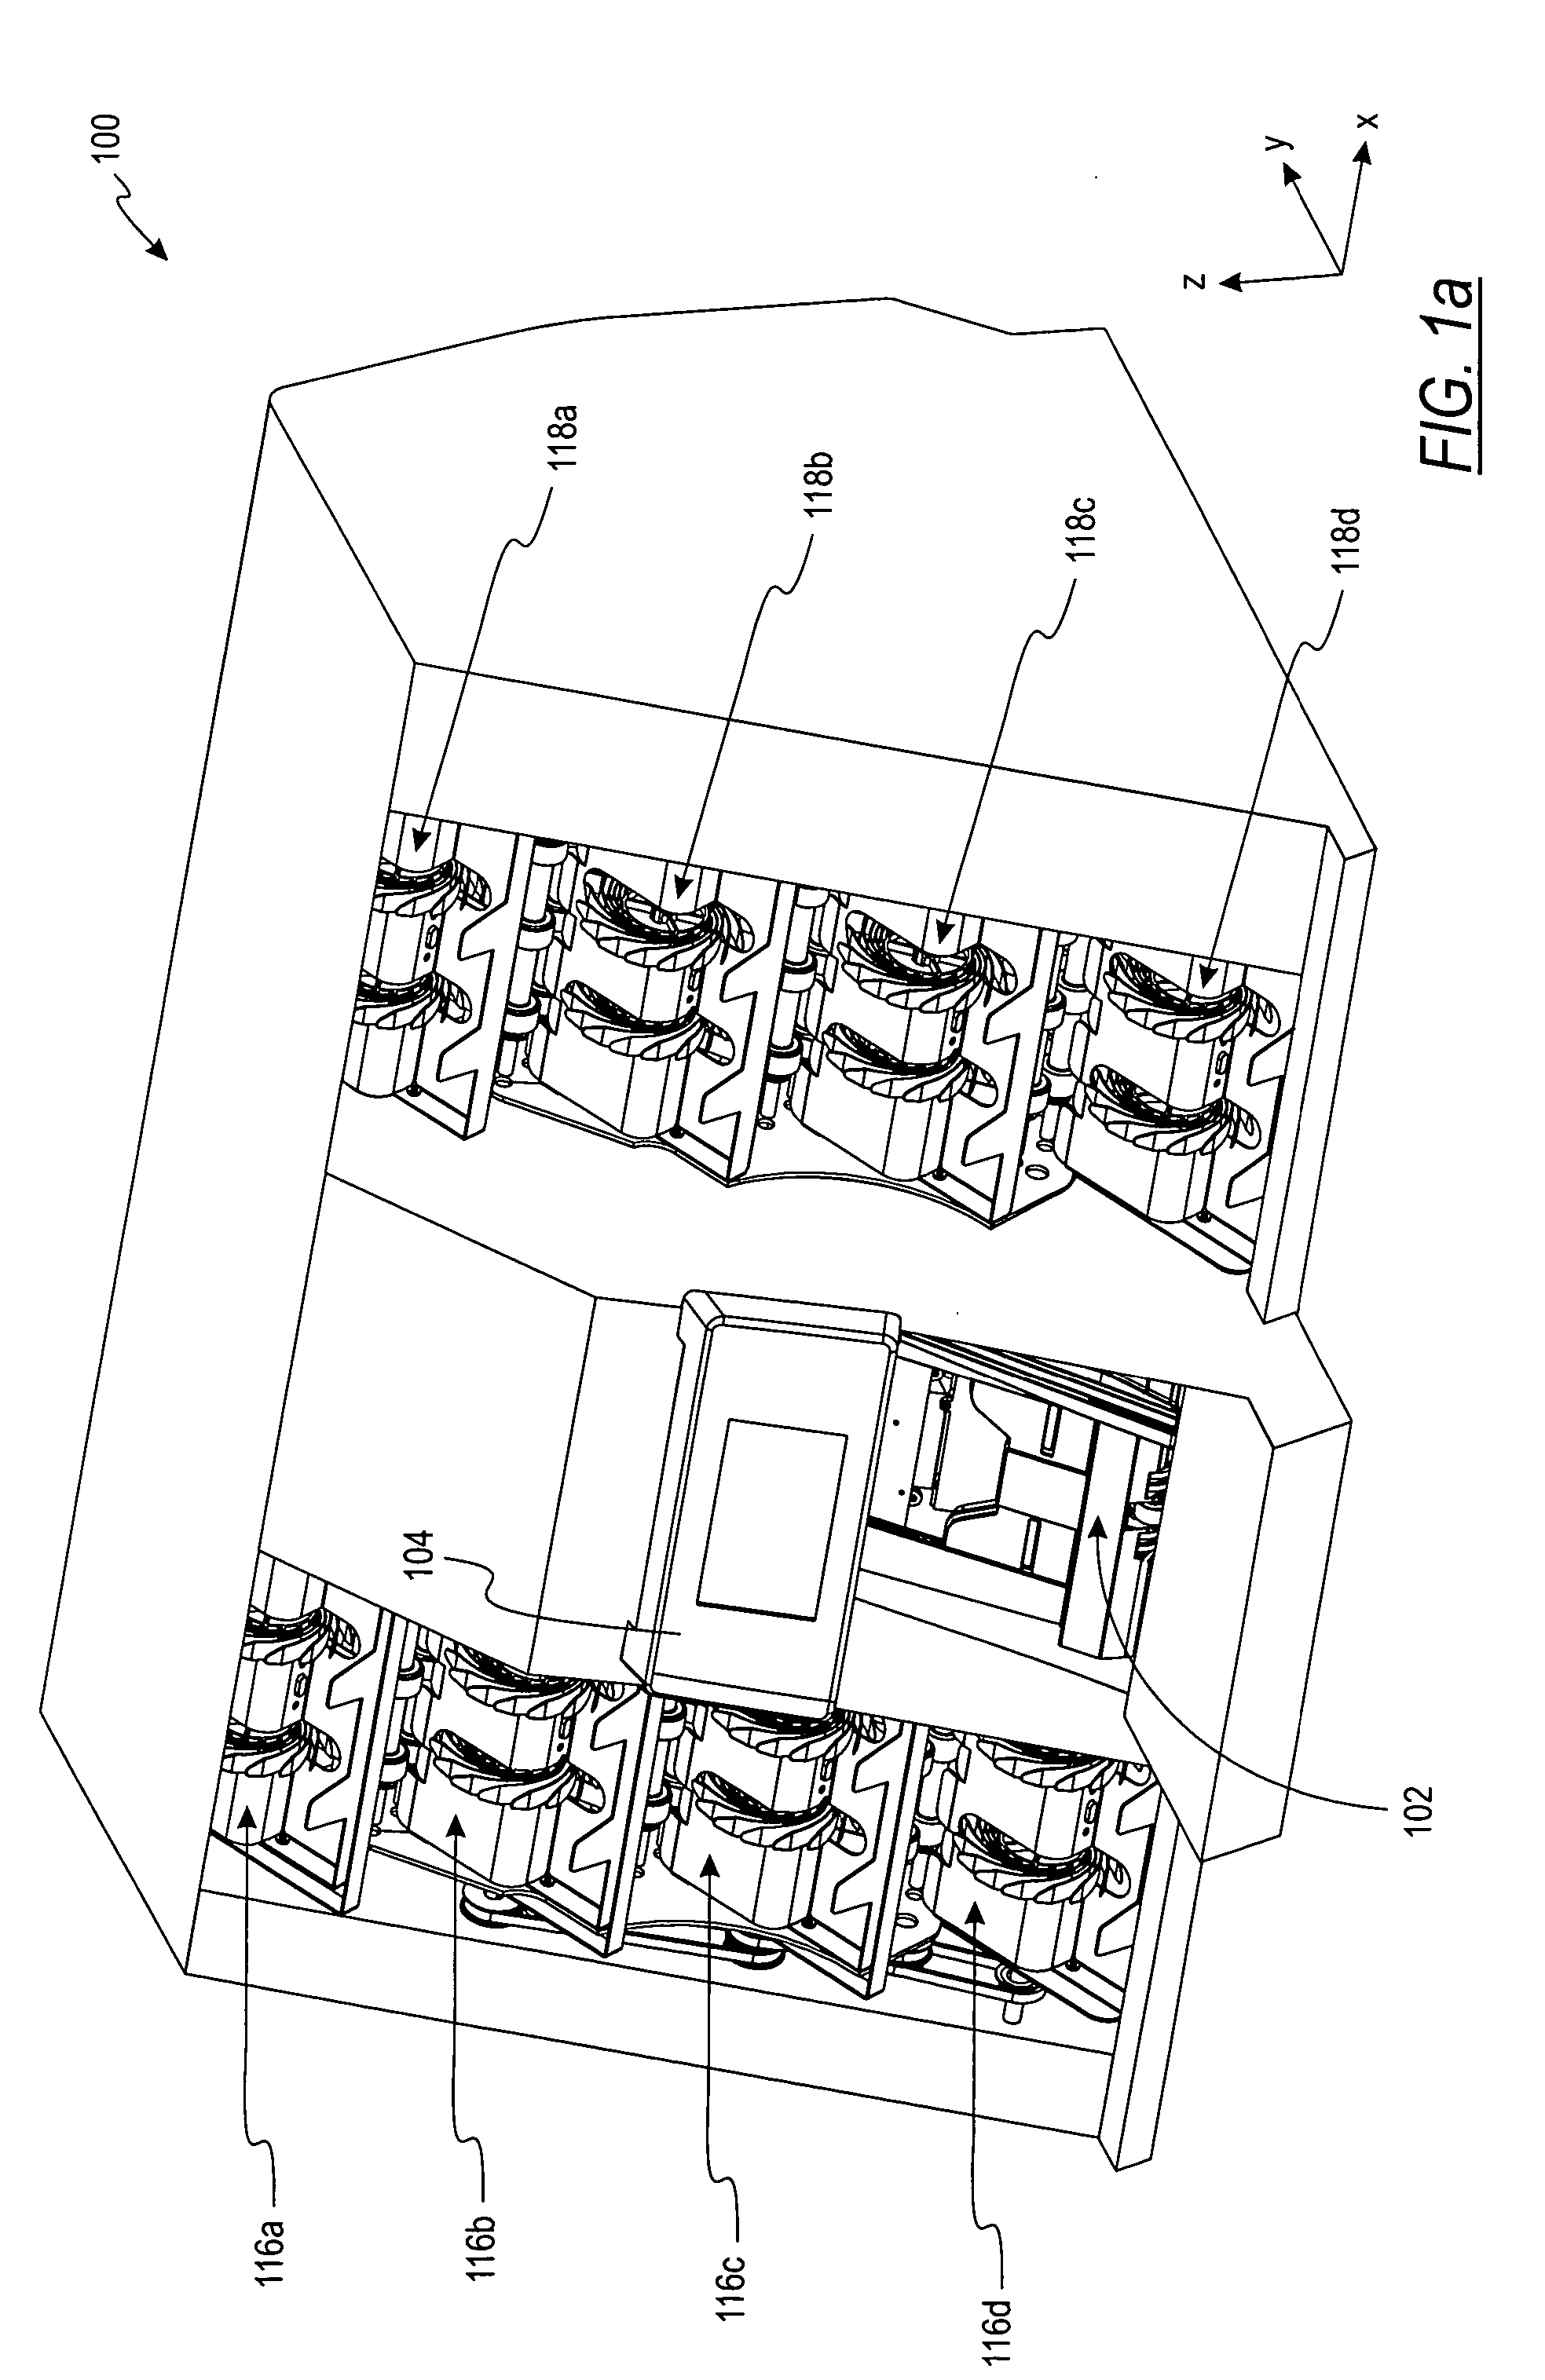 Currency processing device, method and system